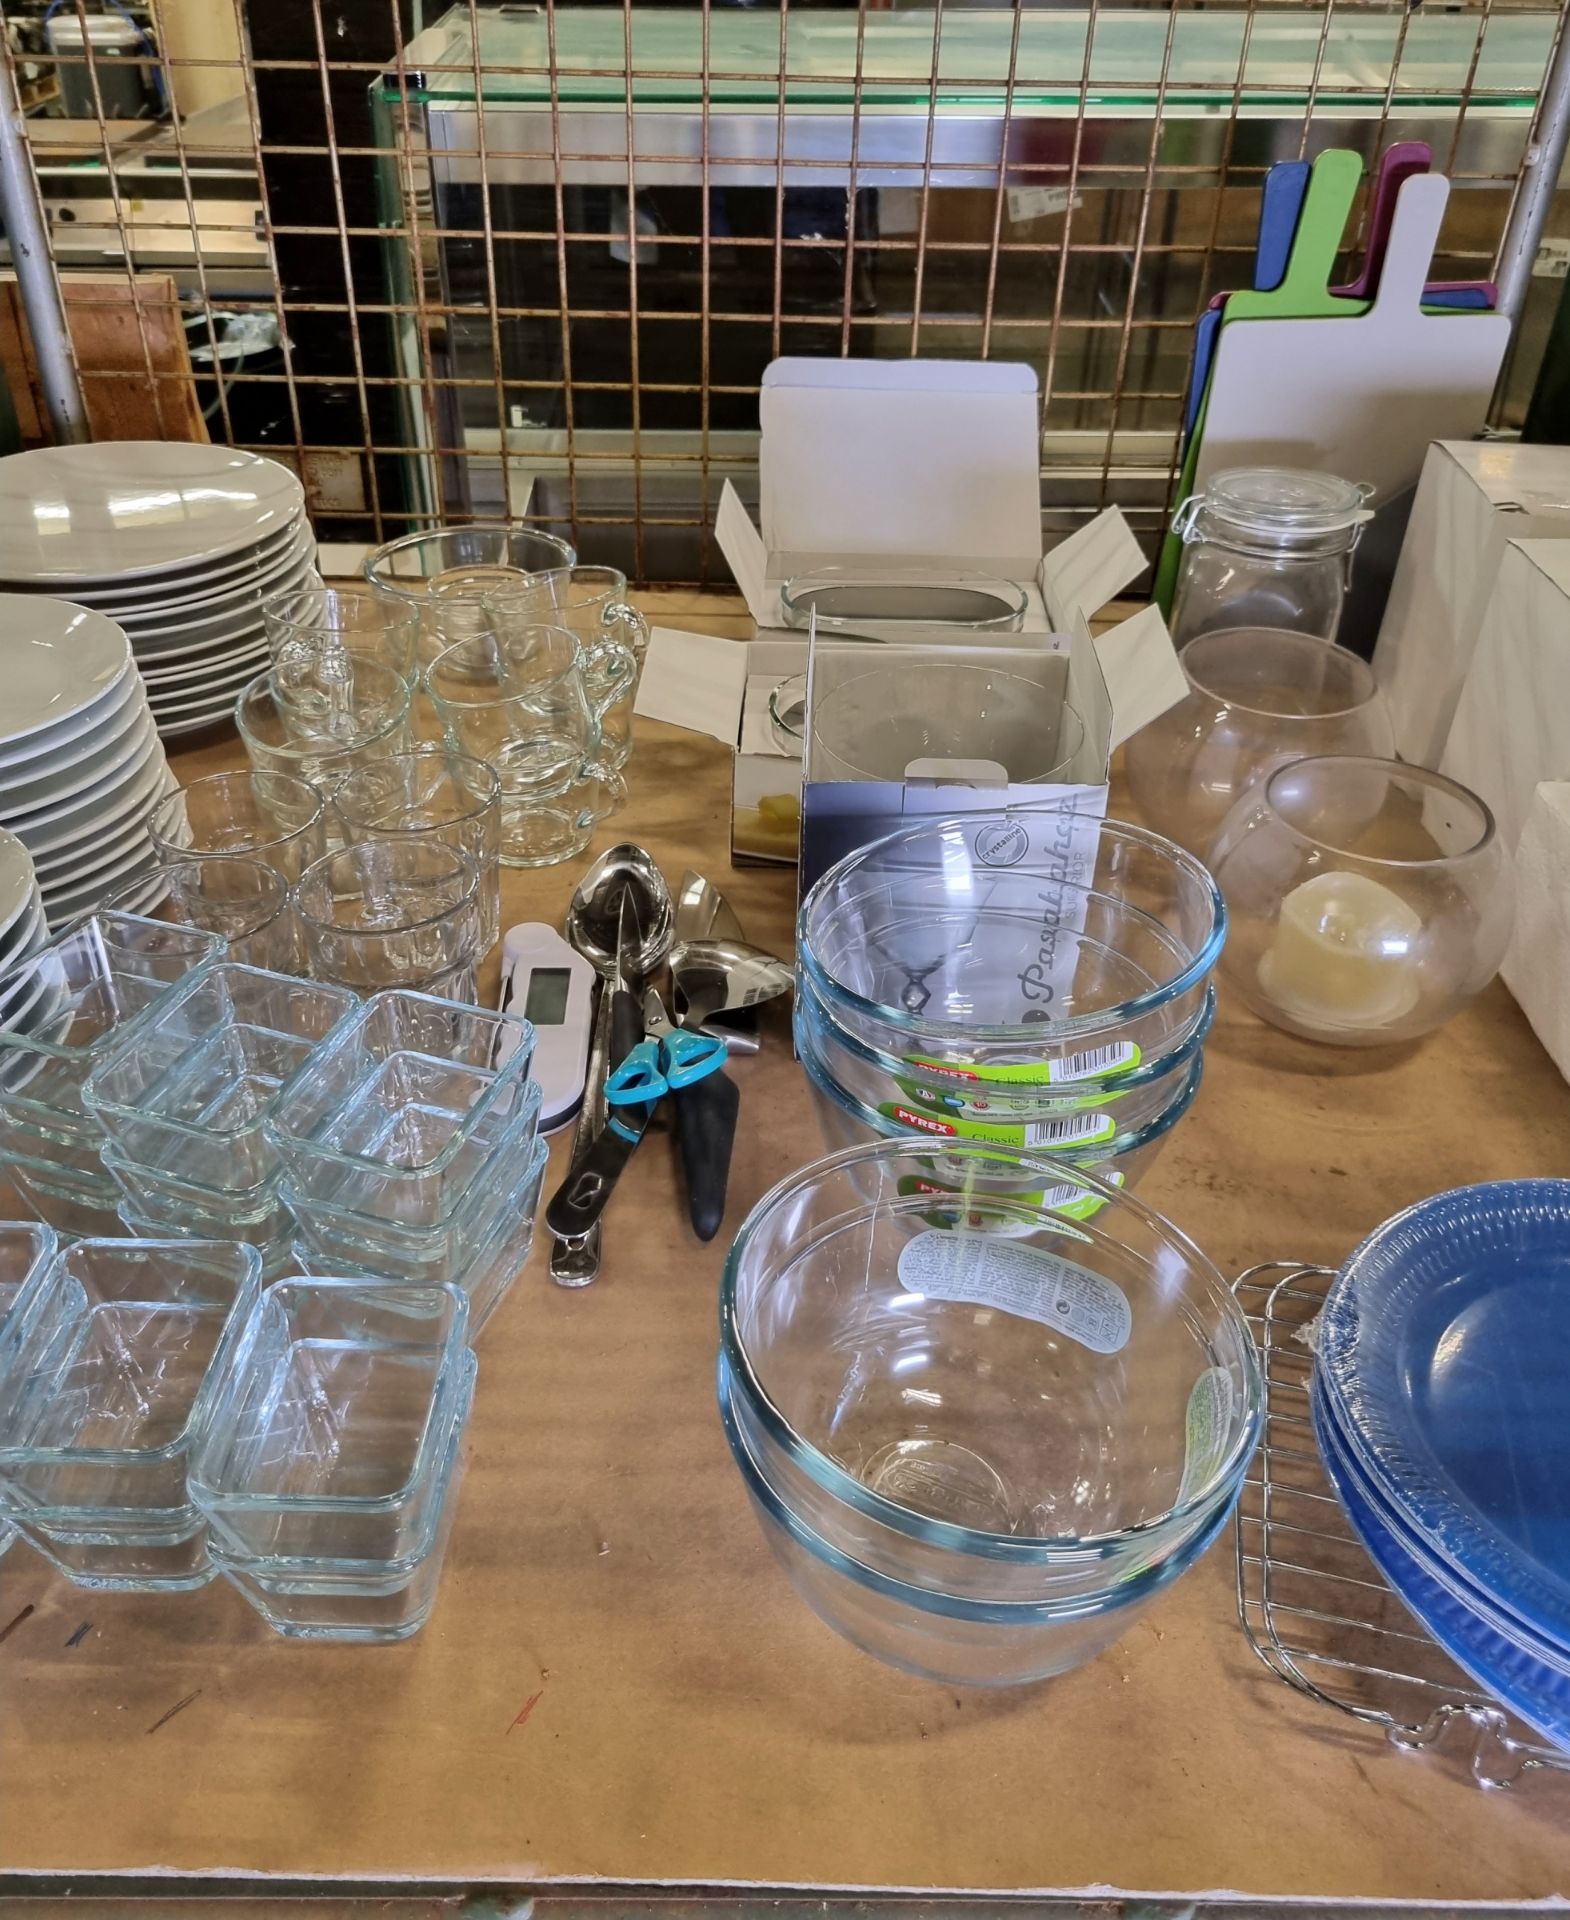 Catering equipment : plates, dishes, bowls, utensils, jars with candle lights - Bild 3 aus 4